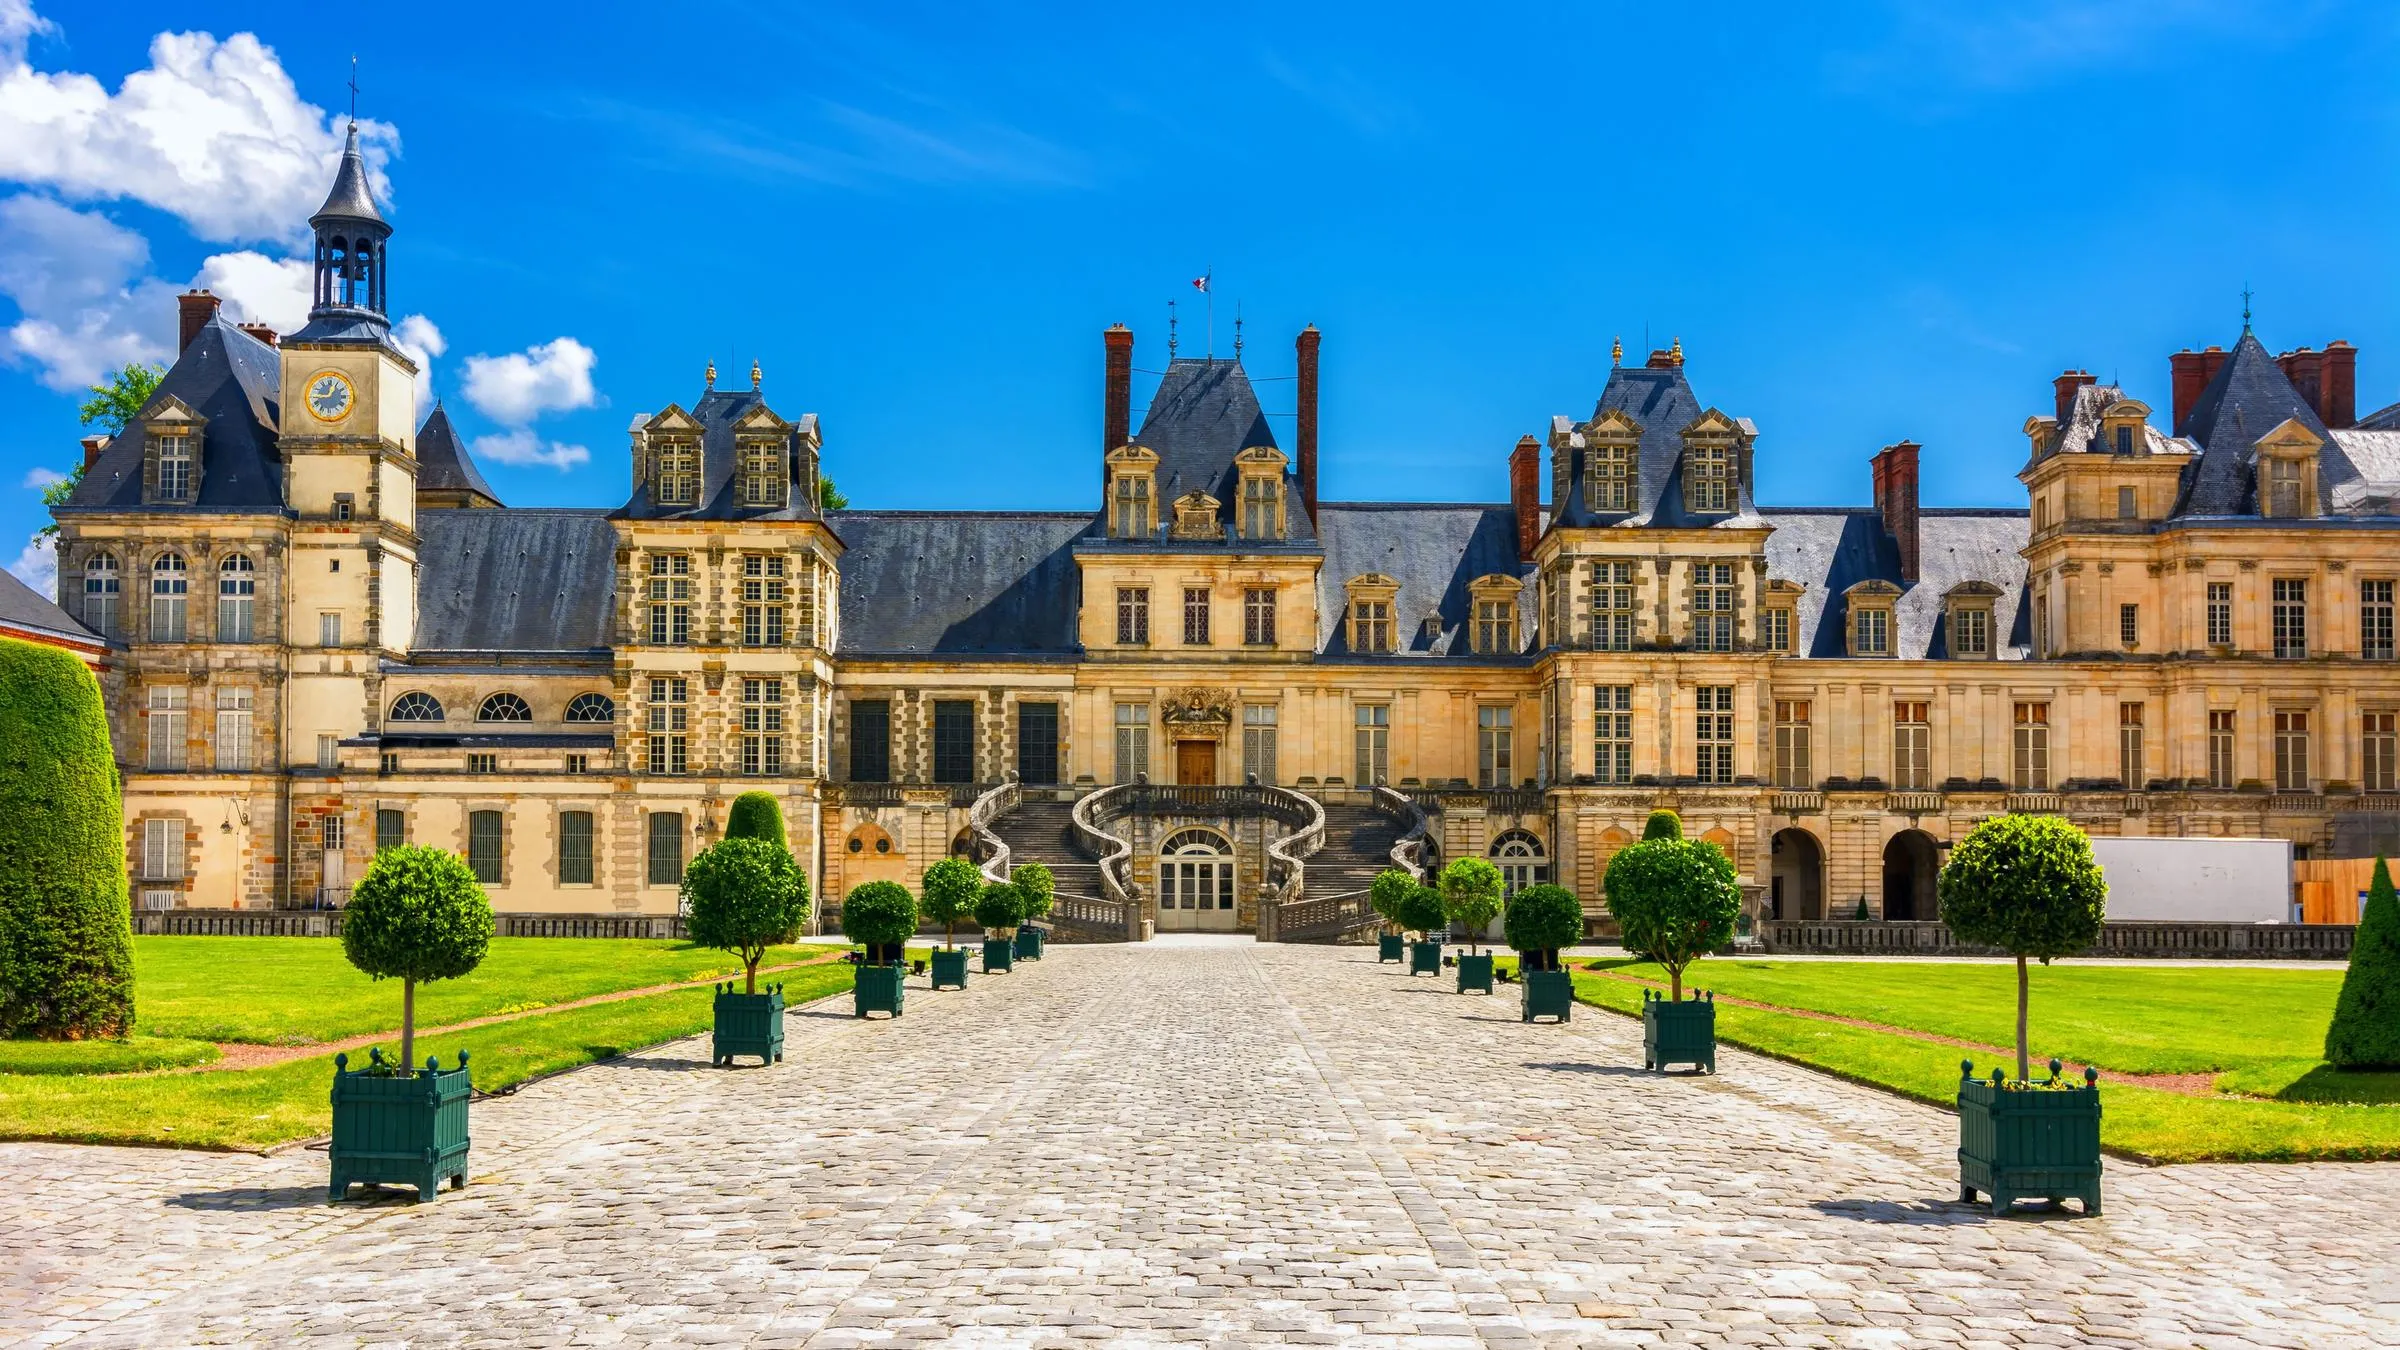 Fontainebleau Castle in France, Europe | Castles - Rated 4.8